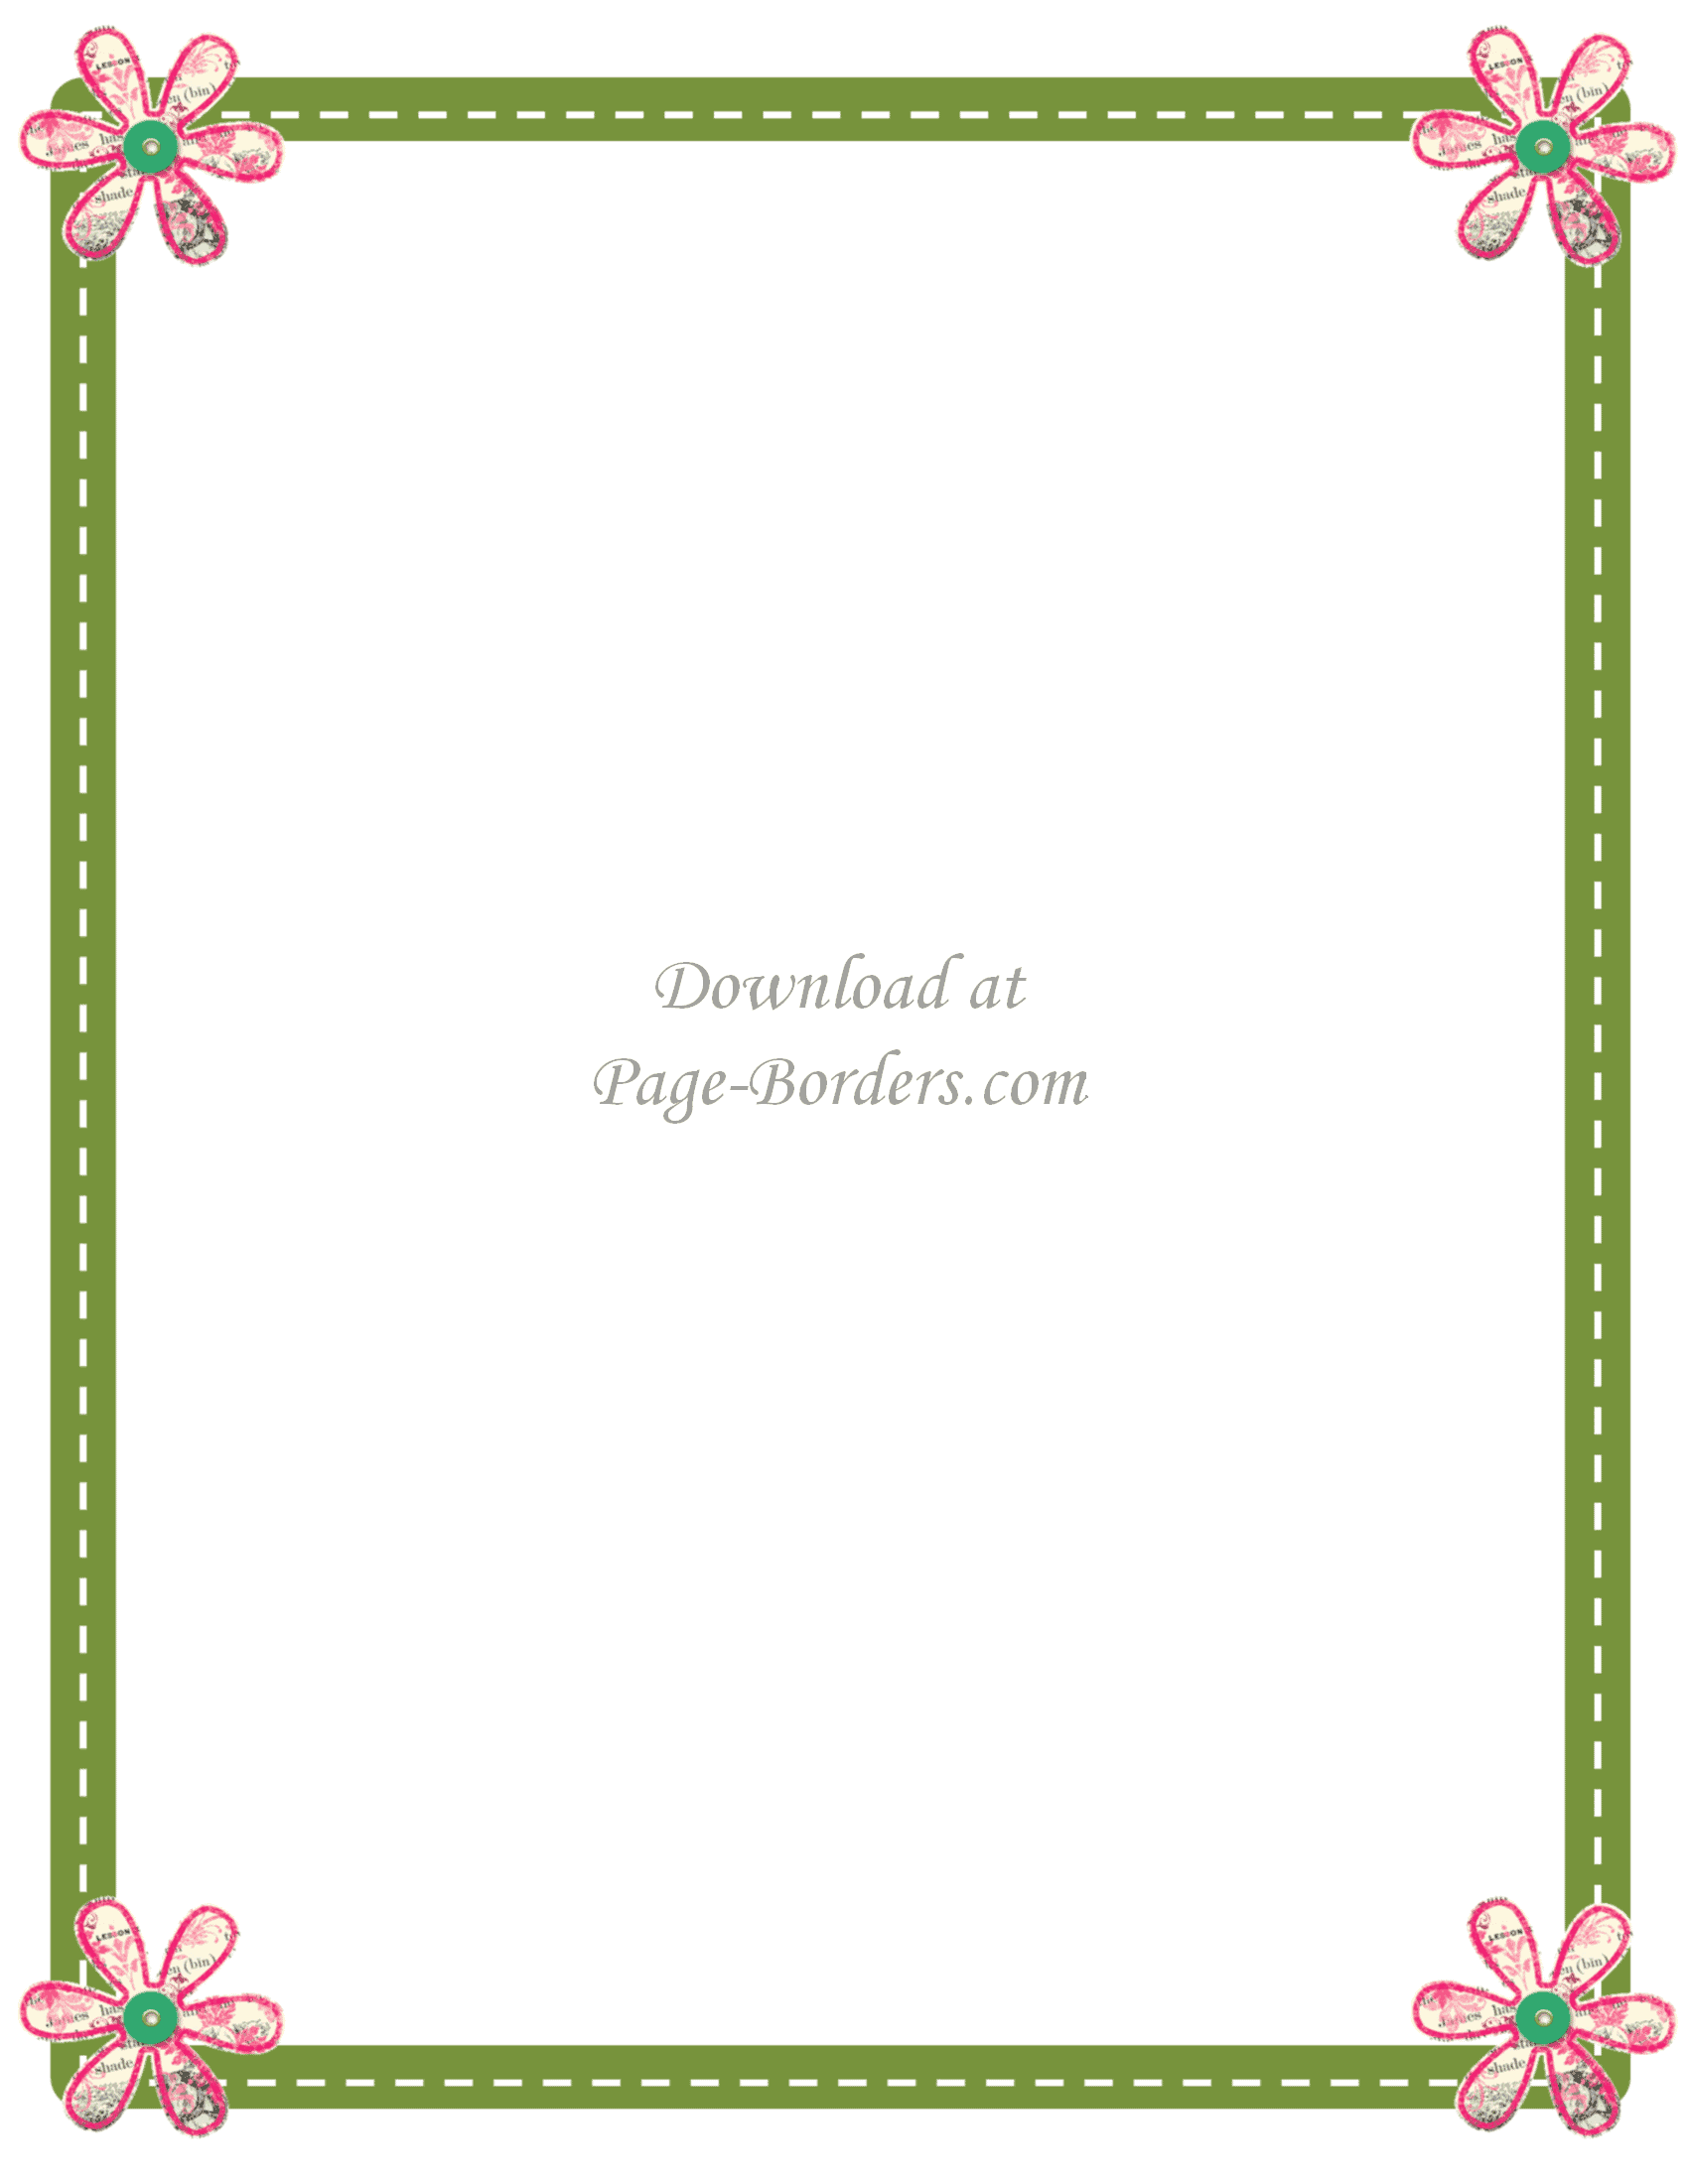 FREE! - Simple Flower Page Border, Page Borders, border 